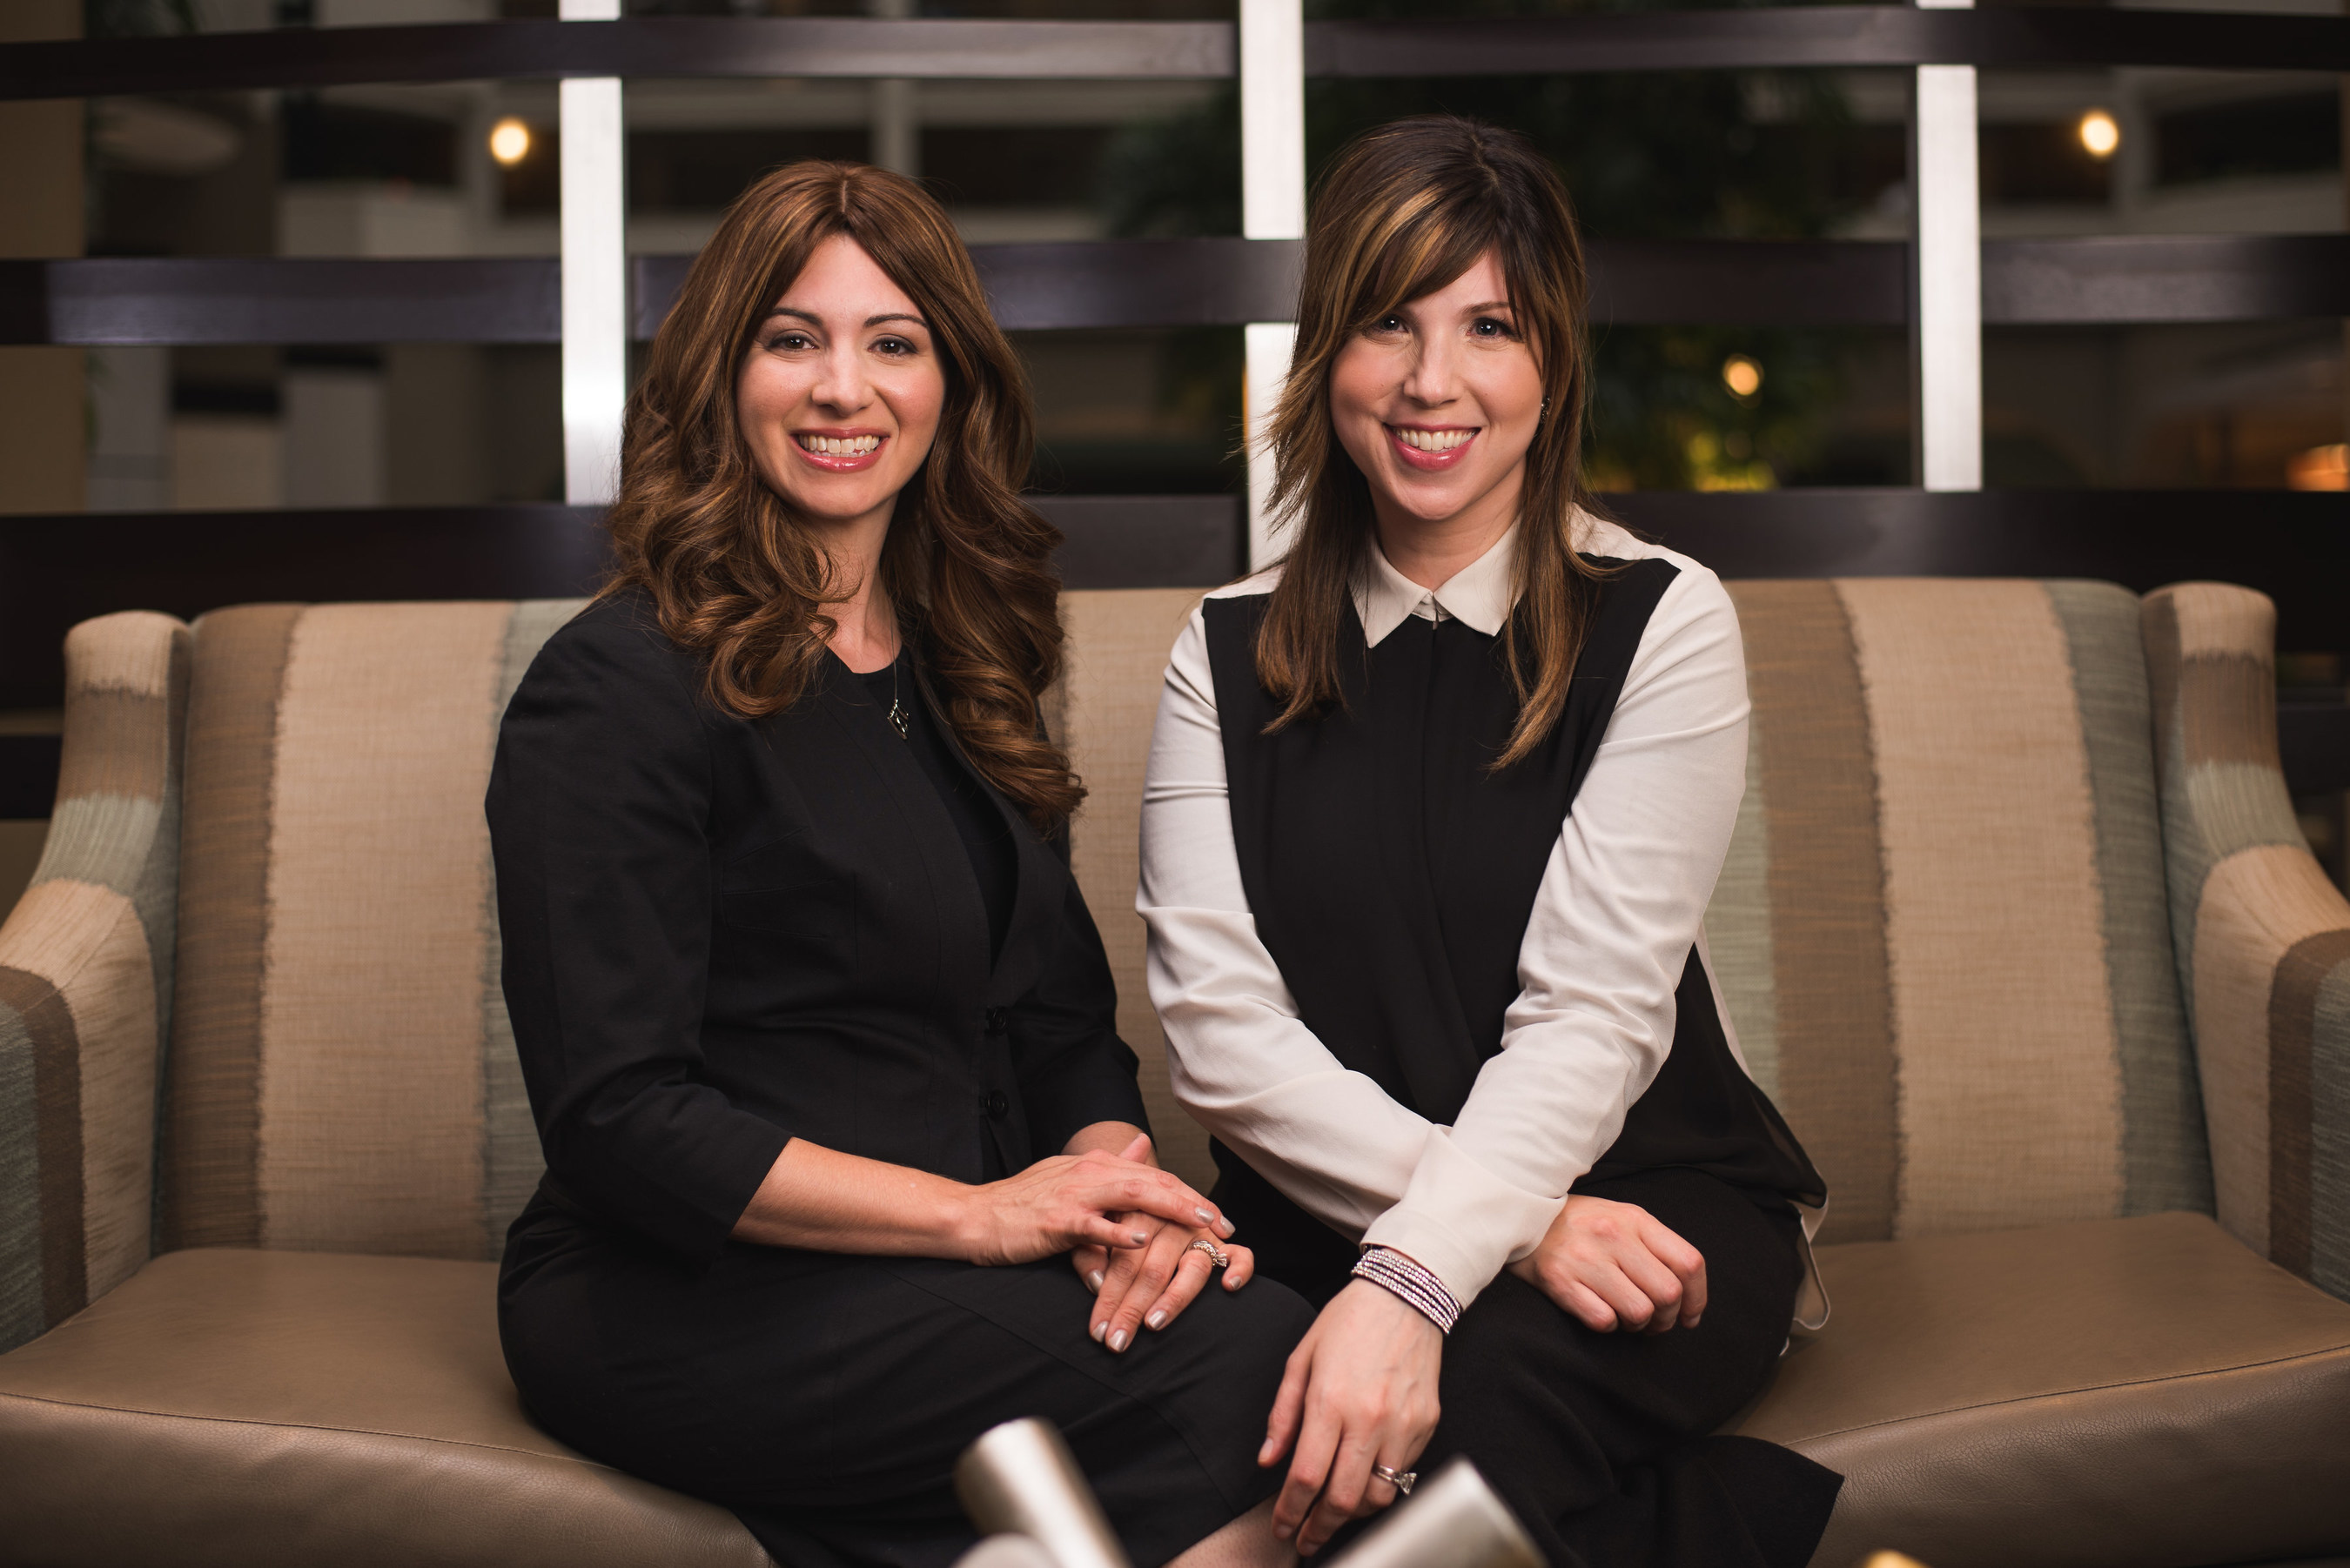 Deborah Shapiro, vice president of marketing and operations (left), joins Jamie Geller, founder, CEO, and chief creative officer (right), at Kosher Media Holdings LLC, which is an integrated multimedia marketing company and the parent company of JOYofKOSHER.com and the award-winning JOY of KOSHER with Jamie Geller magazine.